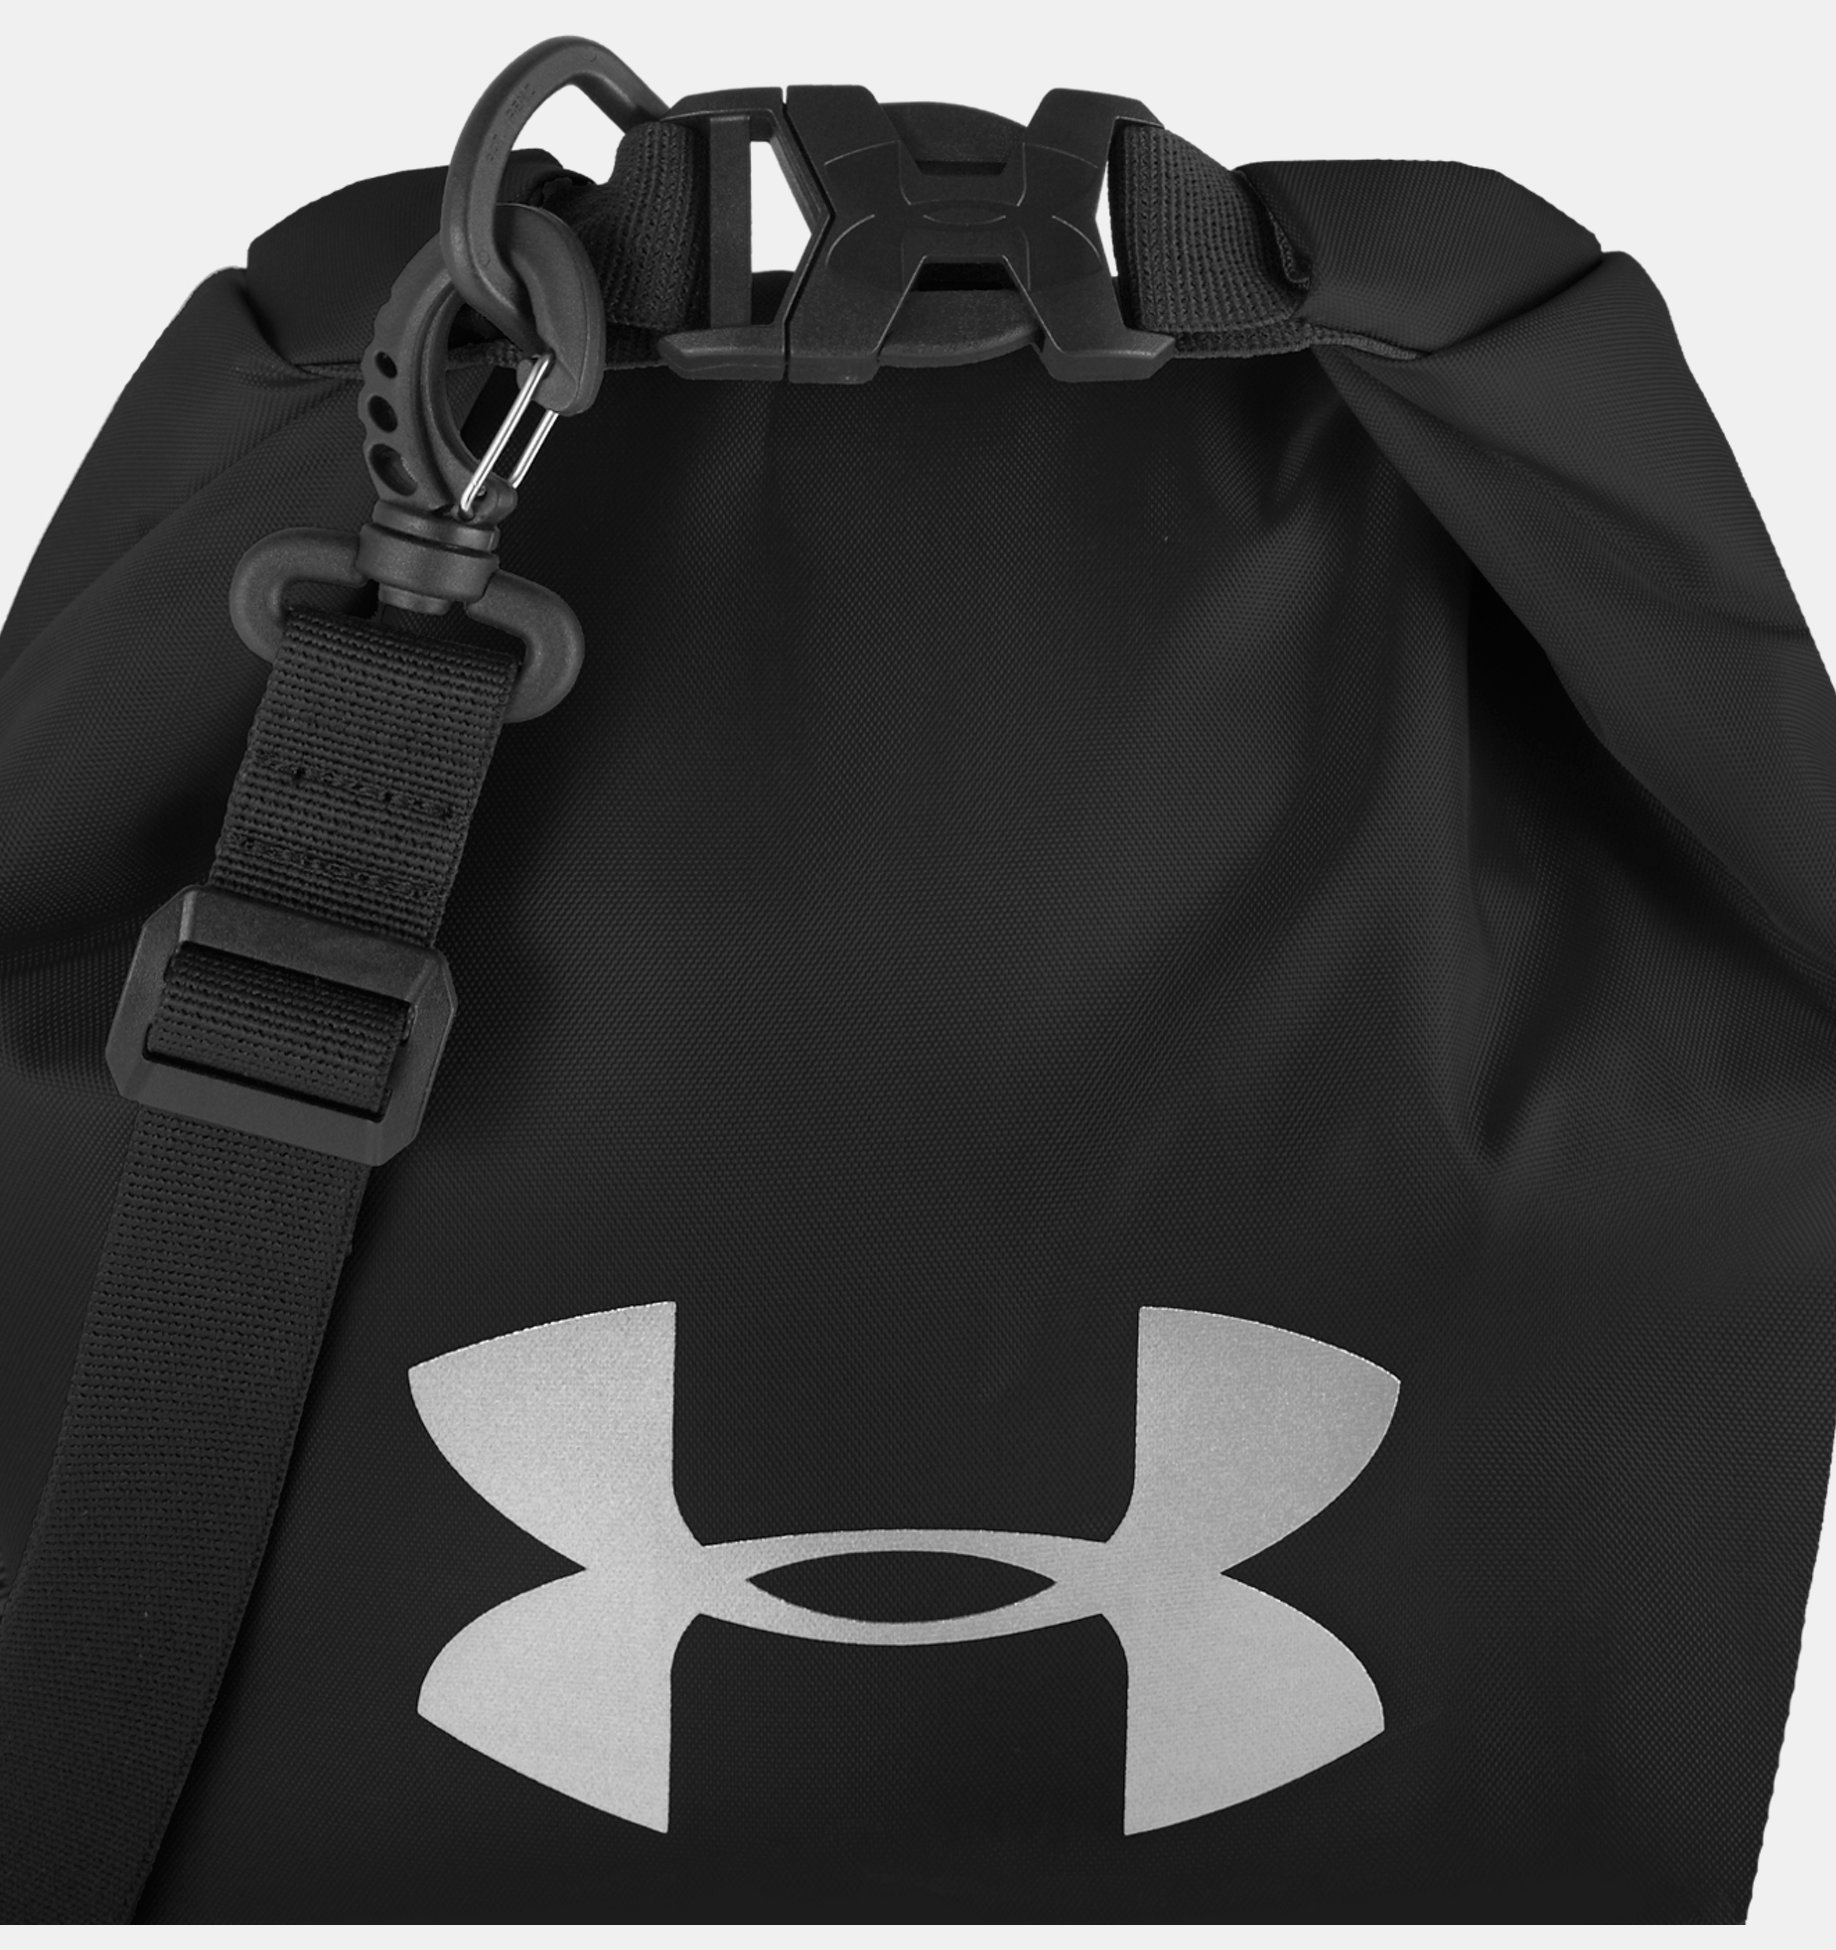 Black with Silver Logo 8.5 x 7.5 x 12.6 Under Armour K39063 Dual Compartment Lunch Bag